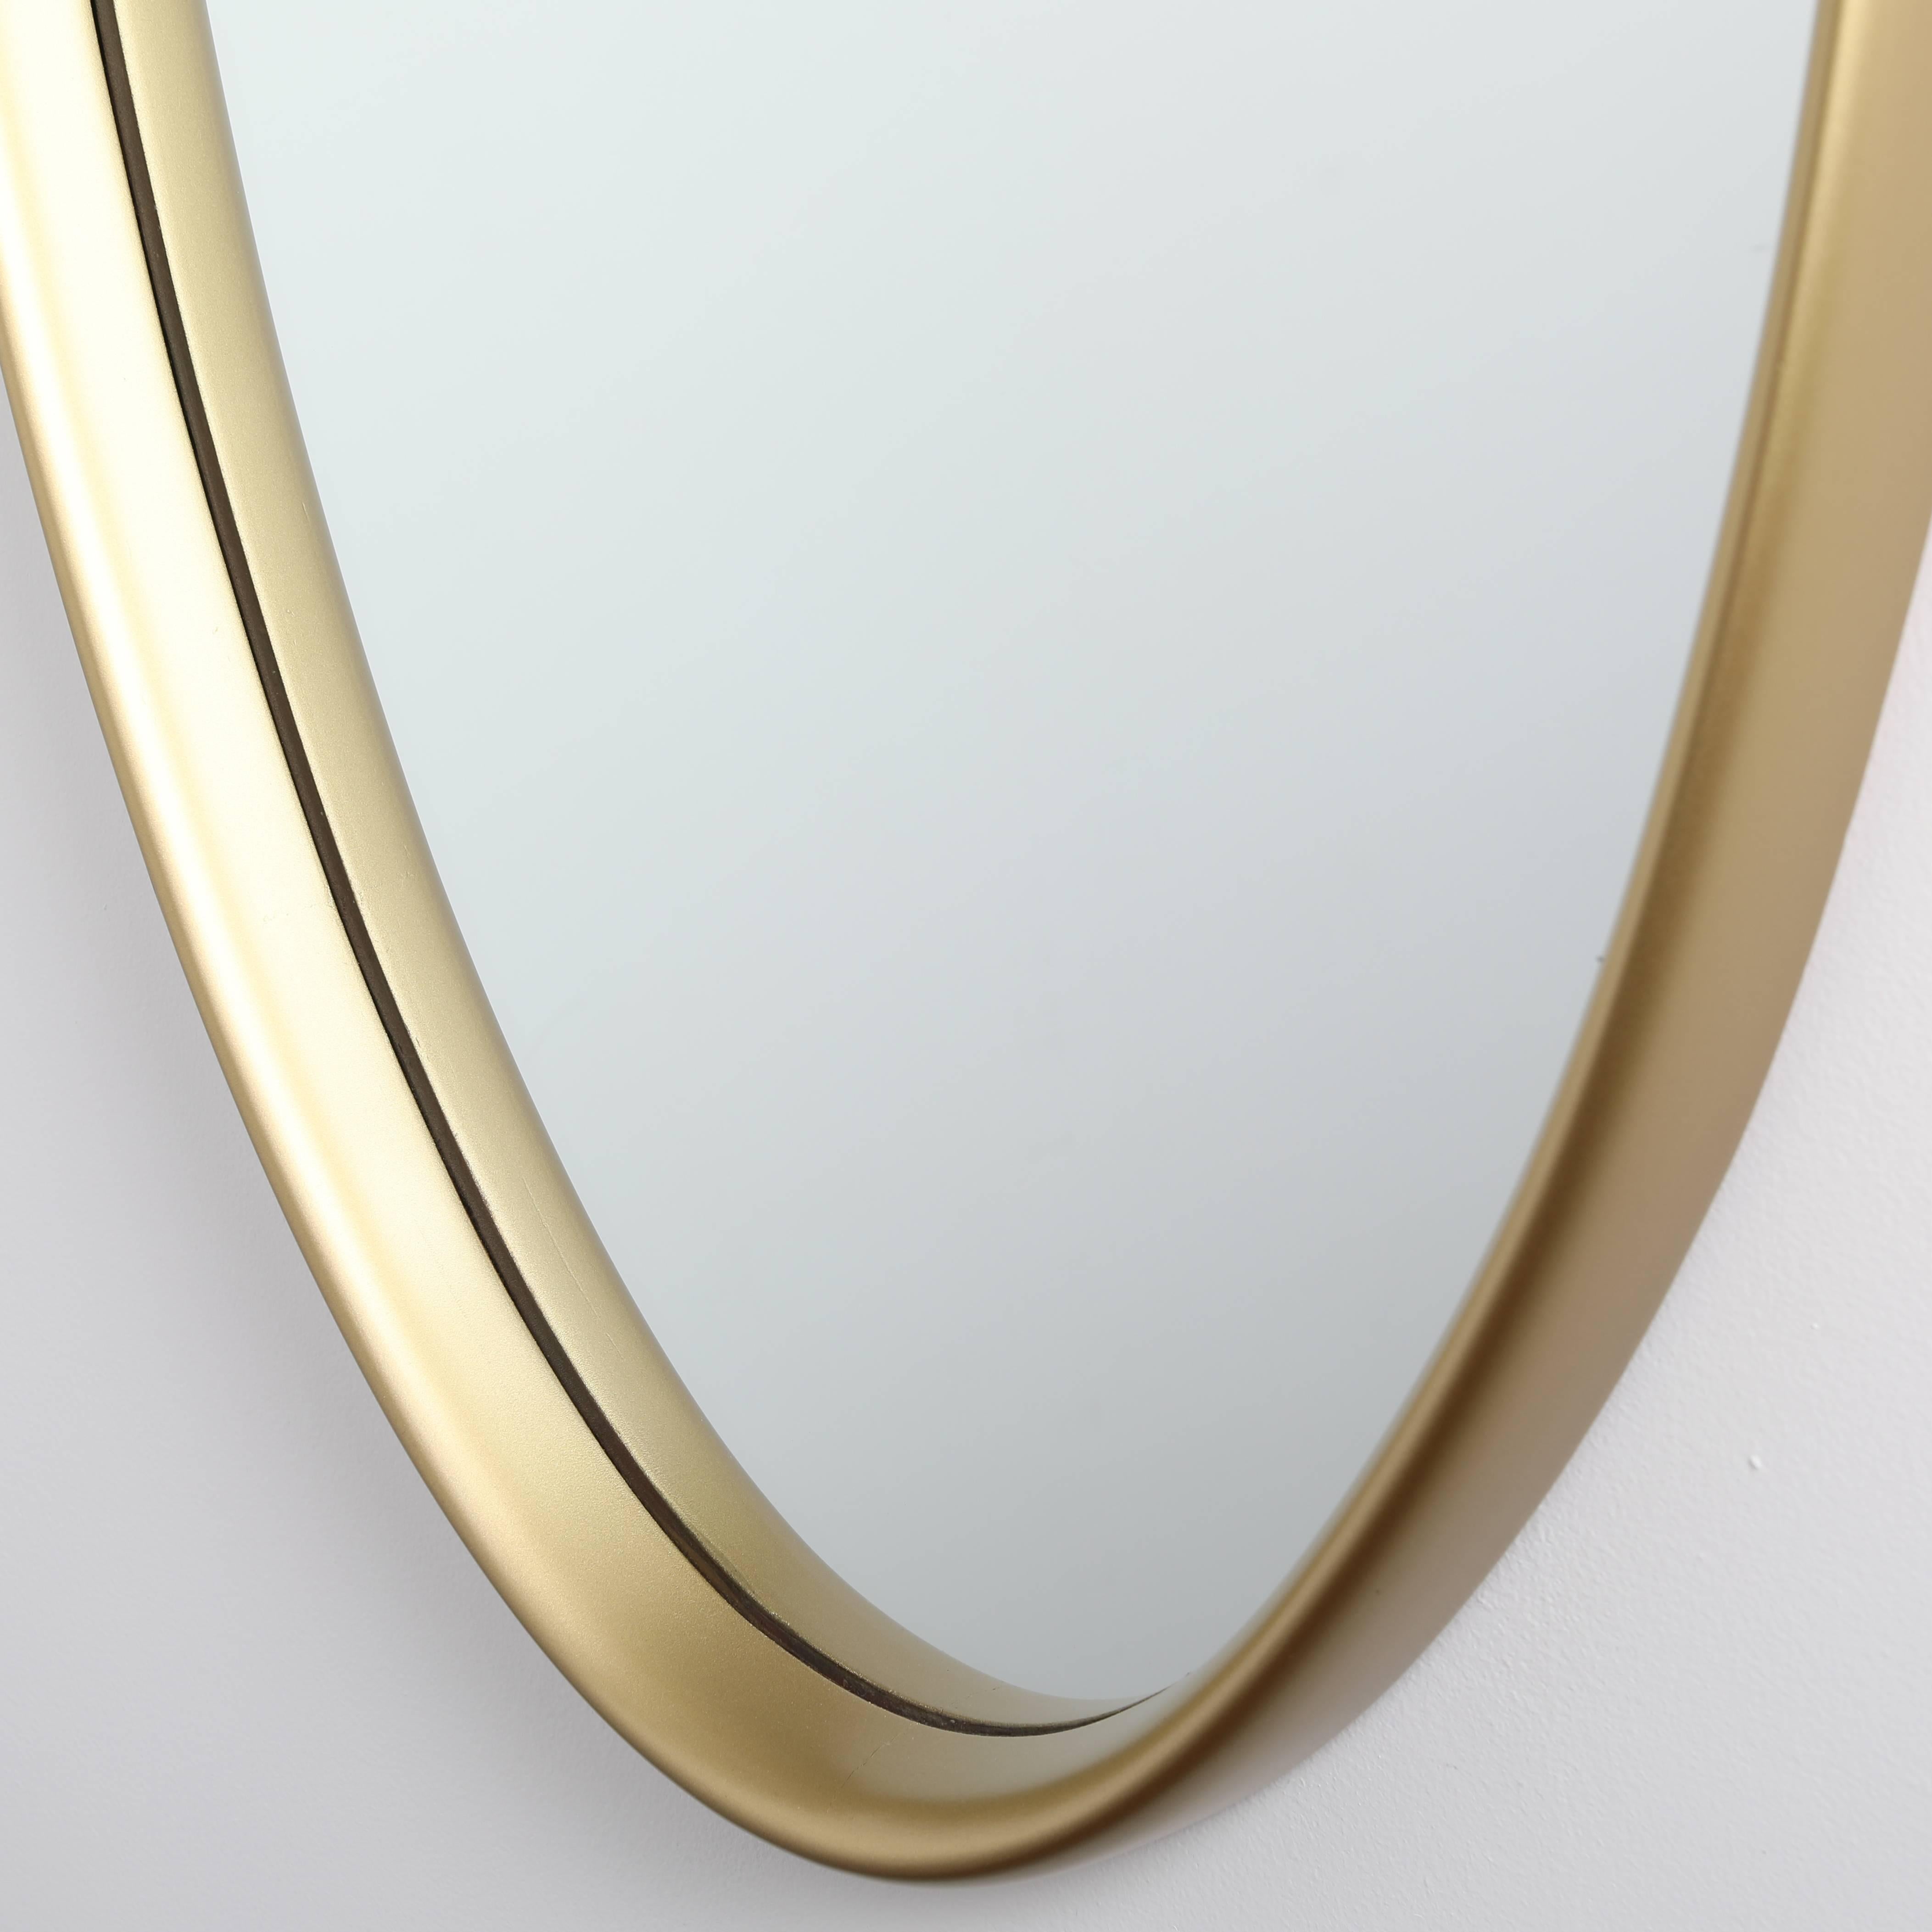 Painted La Barge Oval Mirror, circa 1960s For Sale